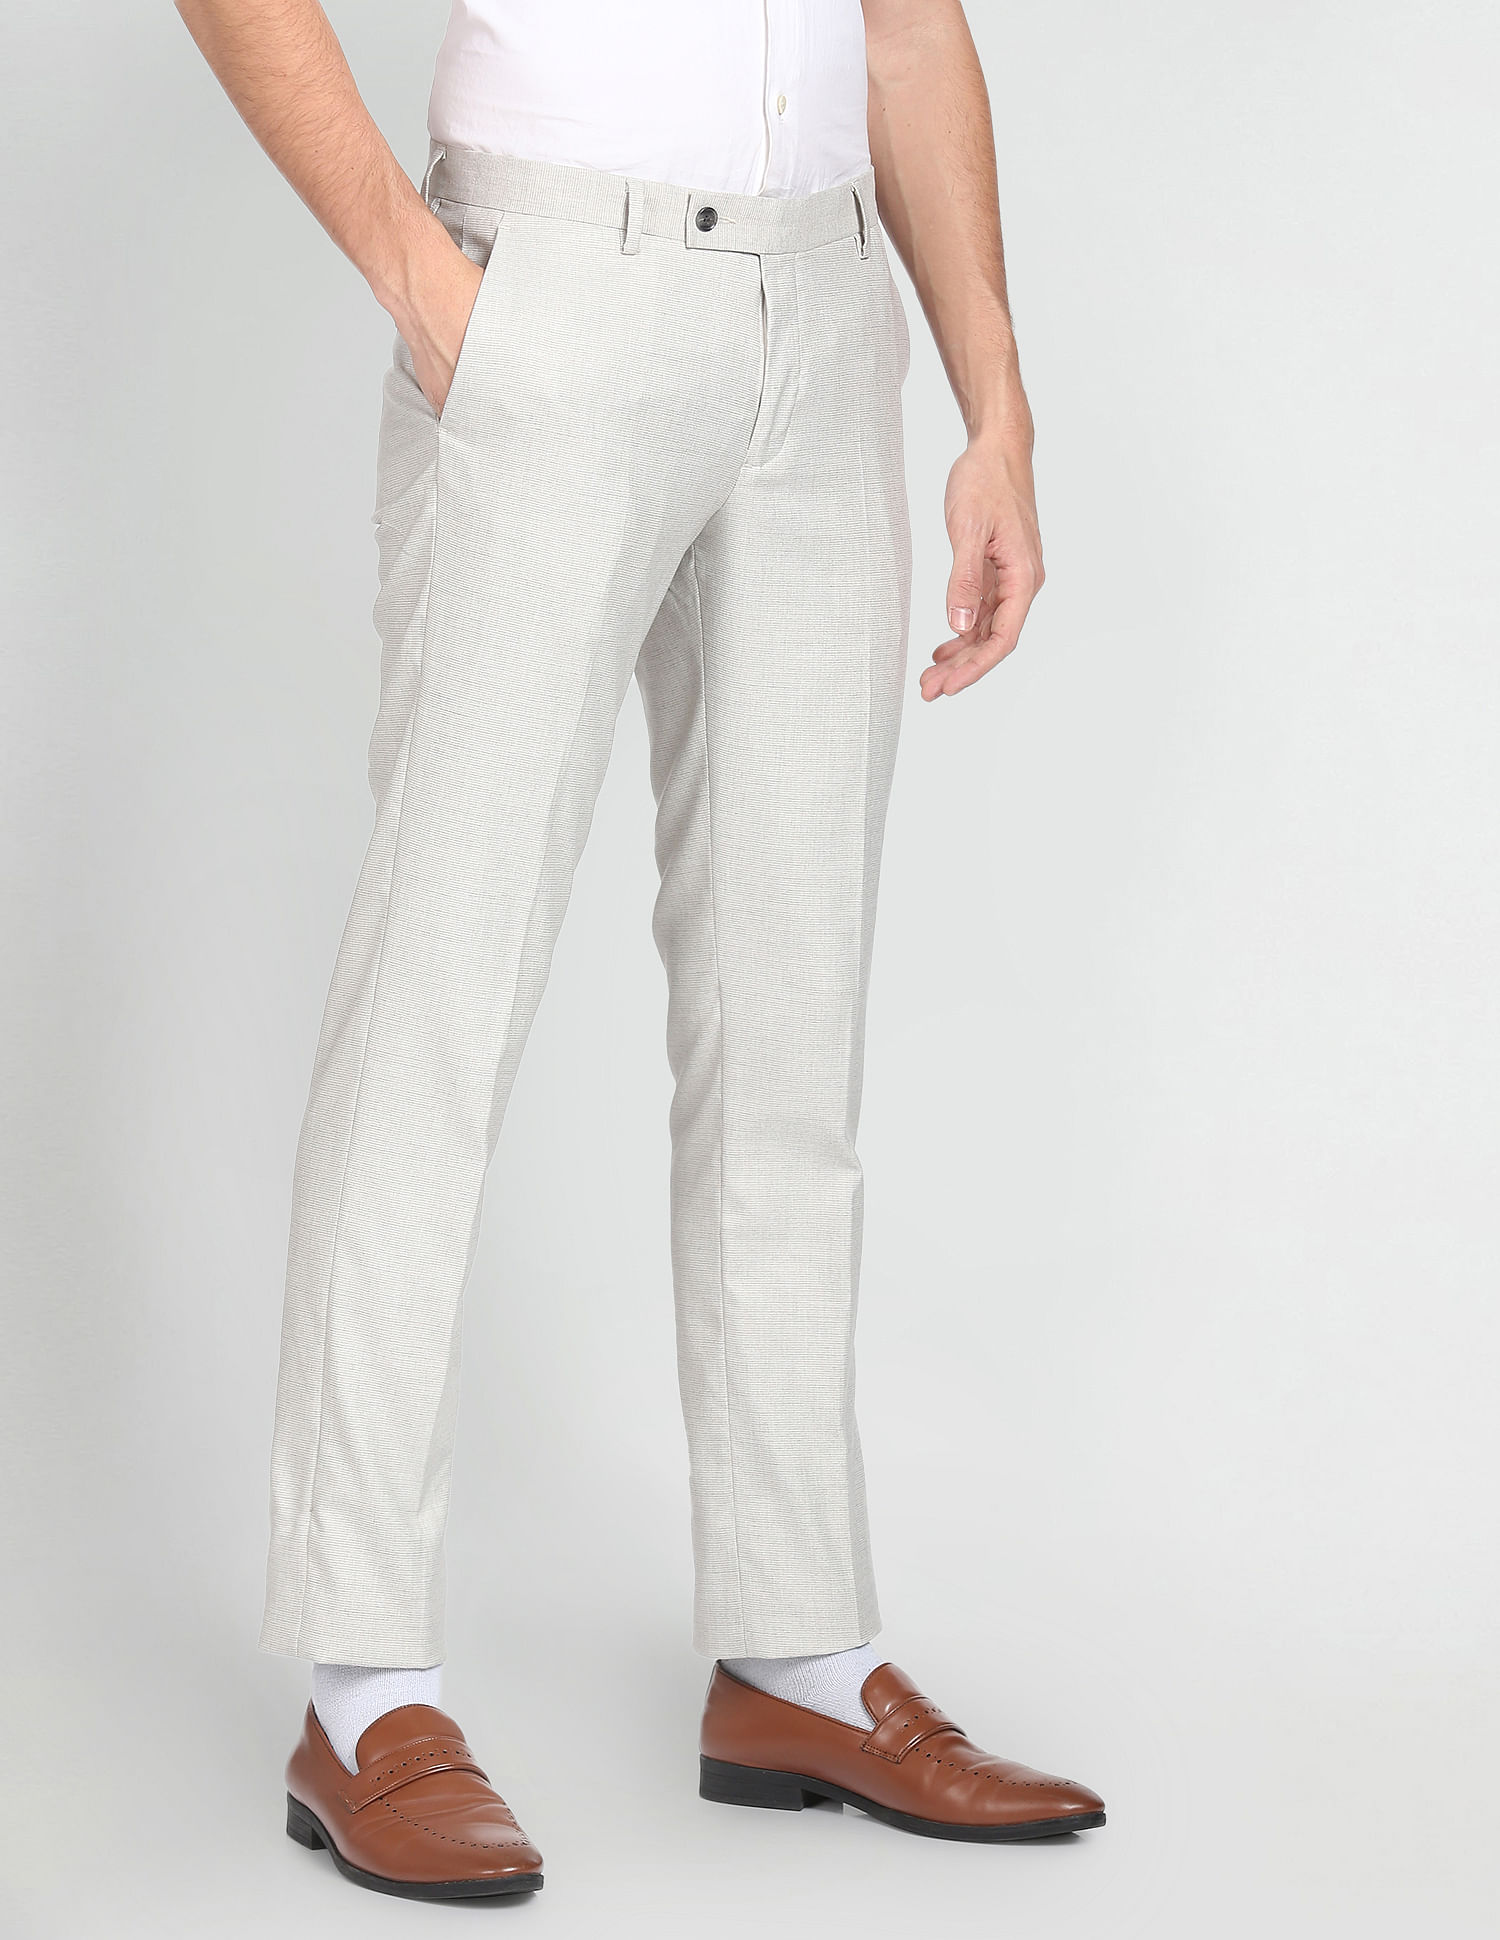 Buy Arrow Grey Tapered Fit Flat Front Trousers for Men's Online @ Tata CLiQ